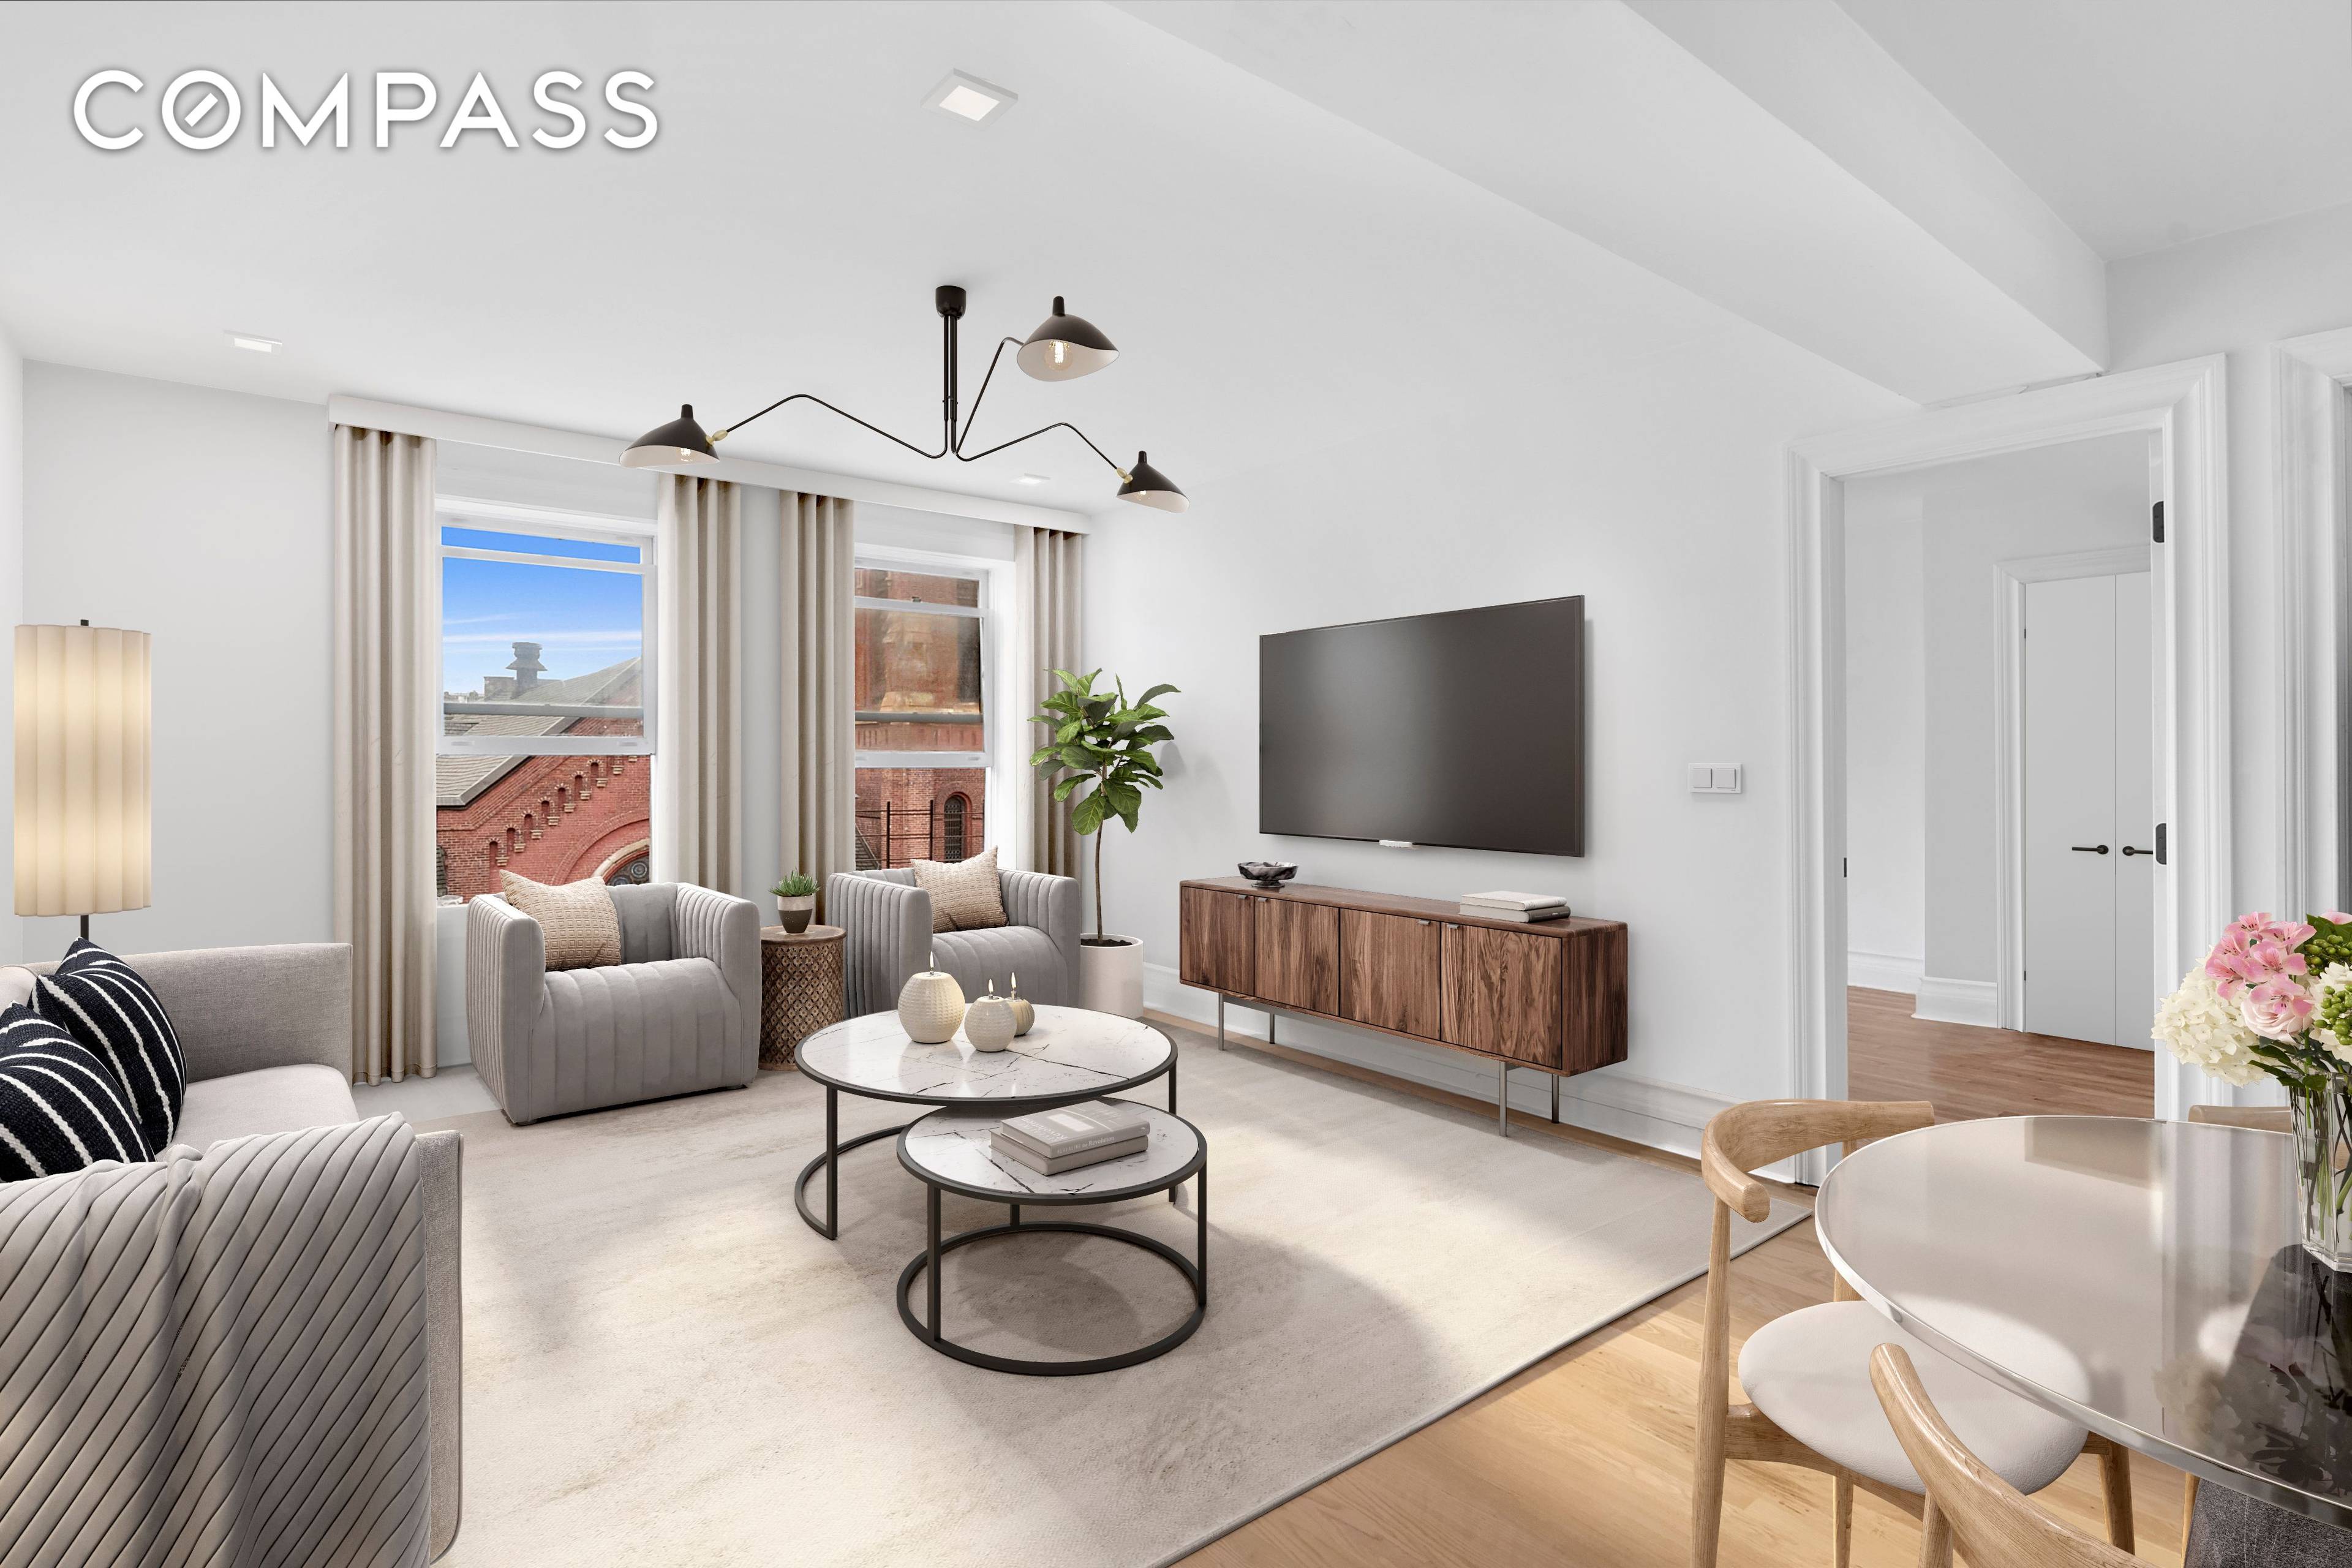 Introducing 475 Washington Avenue, built at the turn of the 20th century in the historic Clinton Hill neighborhood, this newly renovated pre war condominium transports you back in time with ...